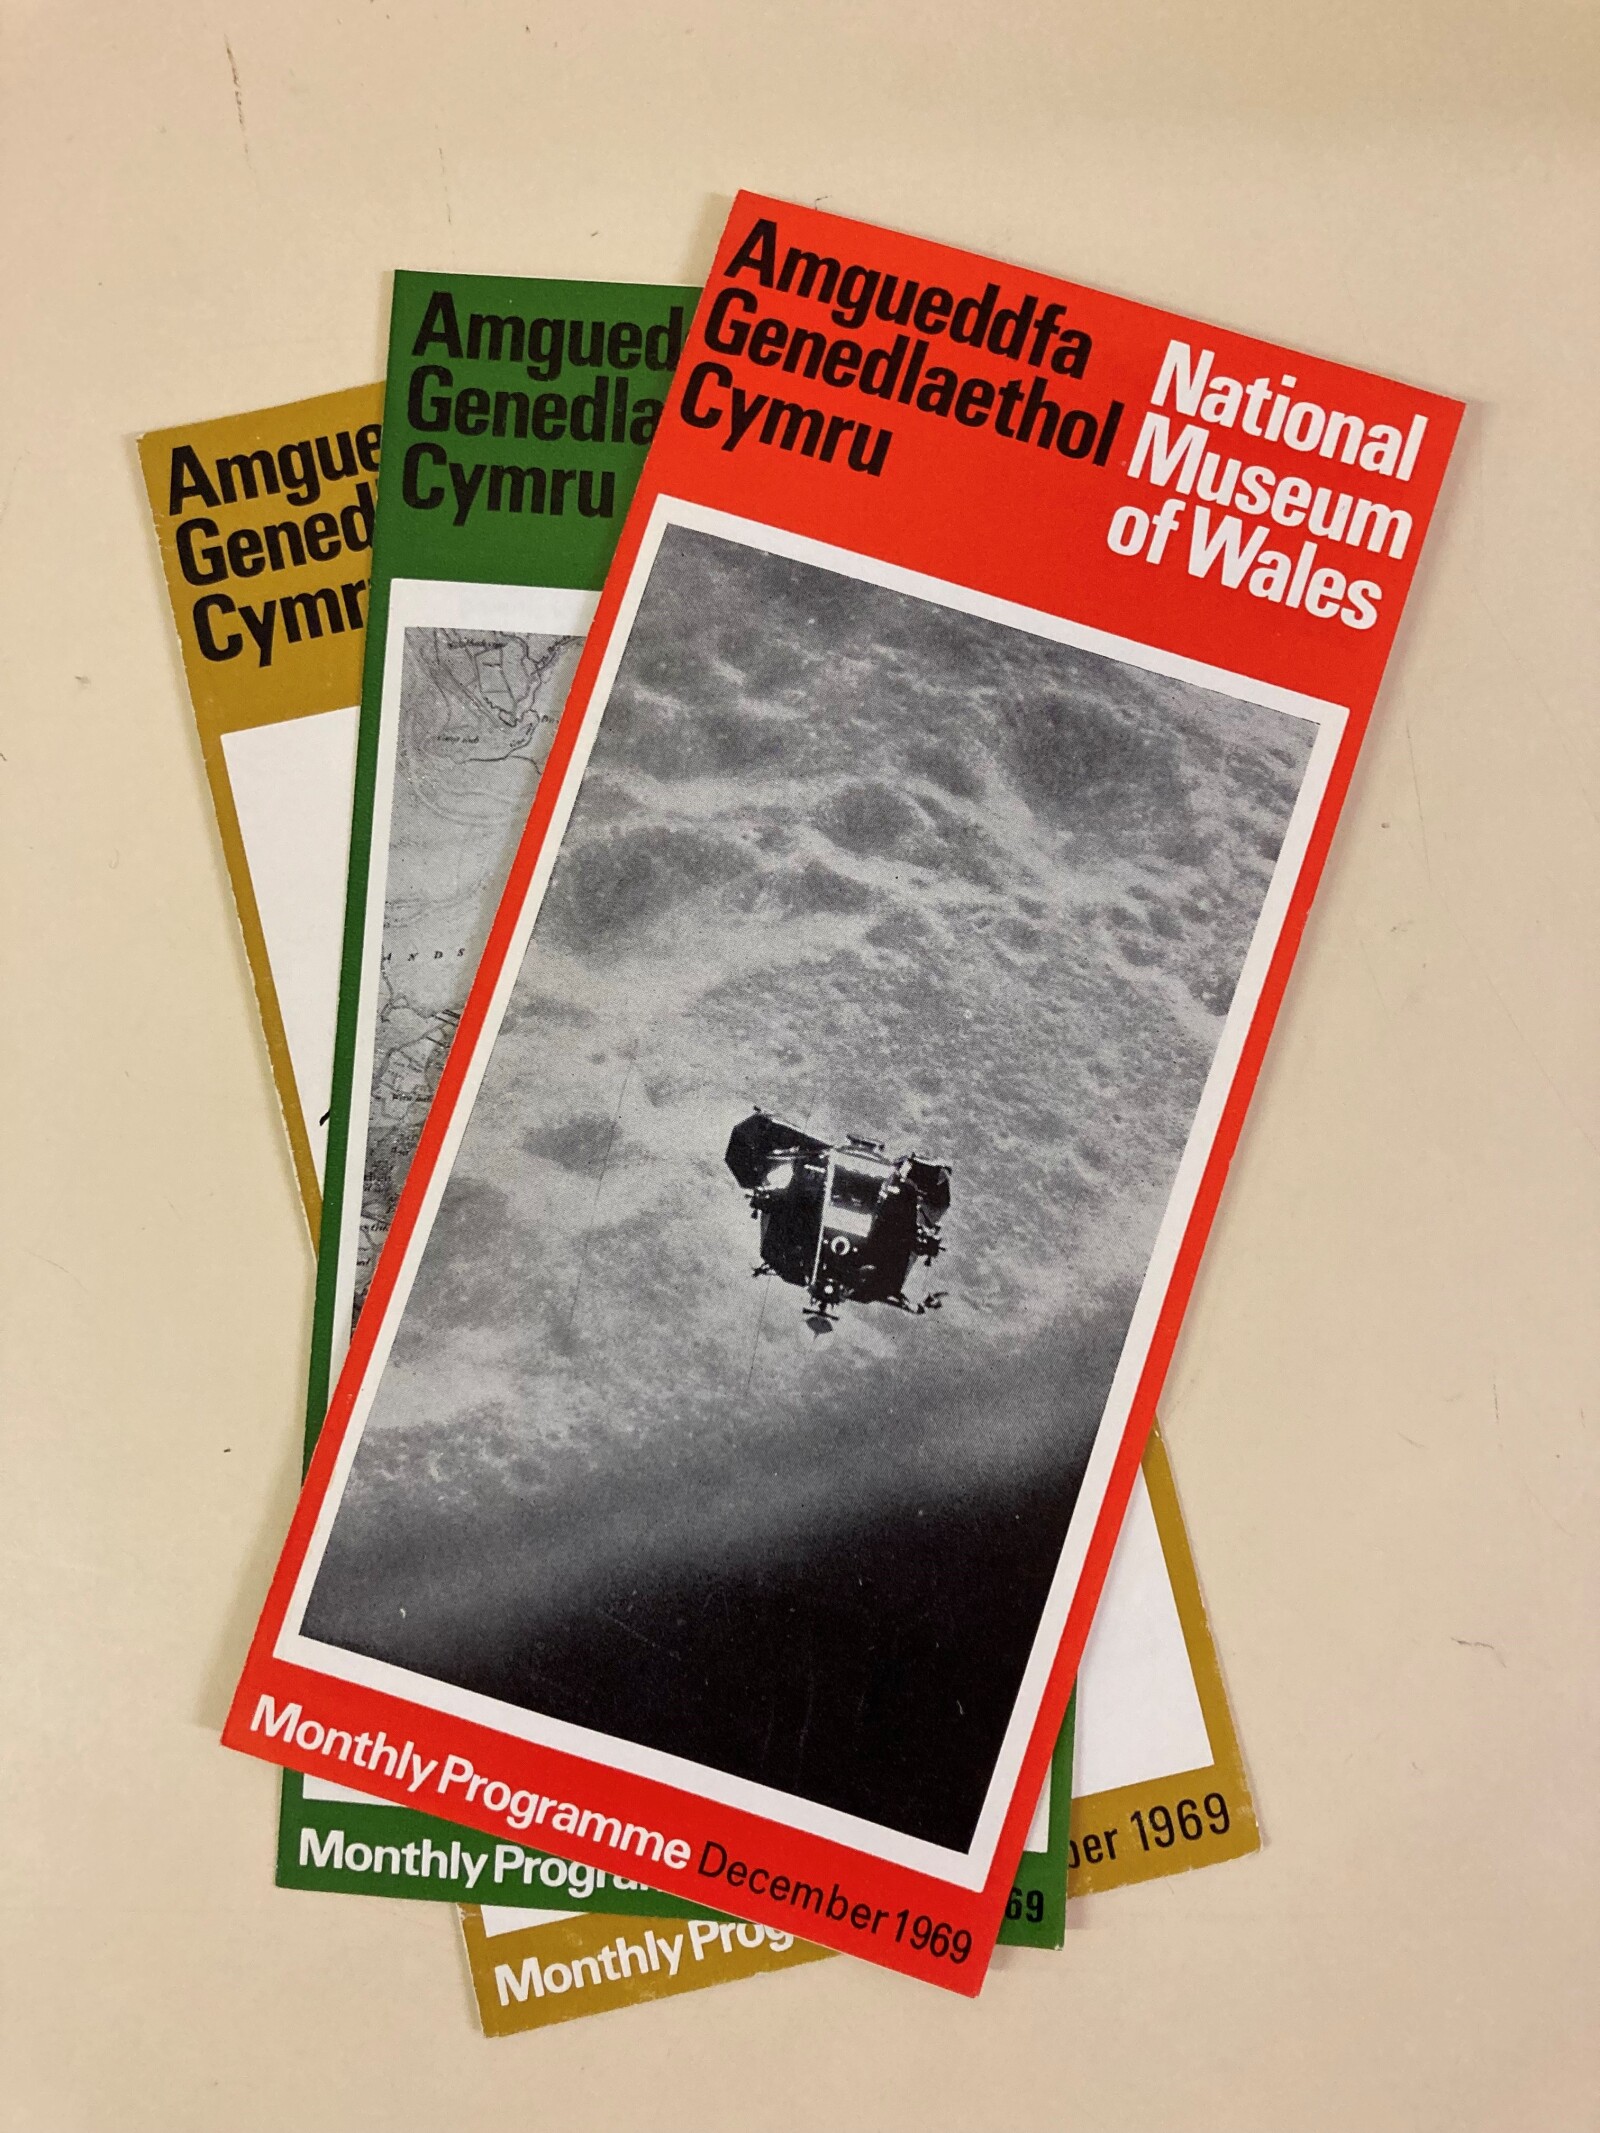 A pile of colourful museum leaflets each with a black and white central photograph. The top leaflet's picture is of the moon and spacecraft.